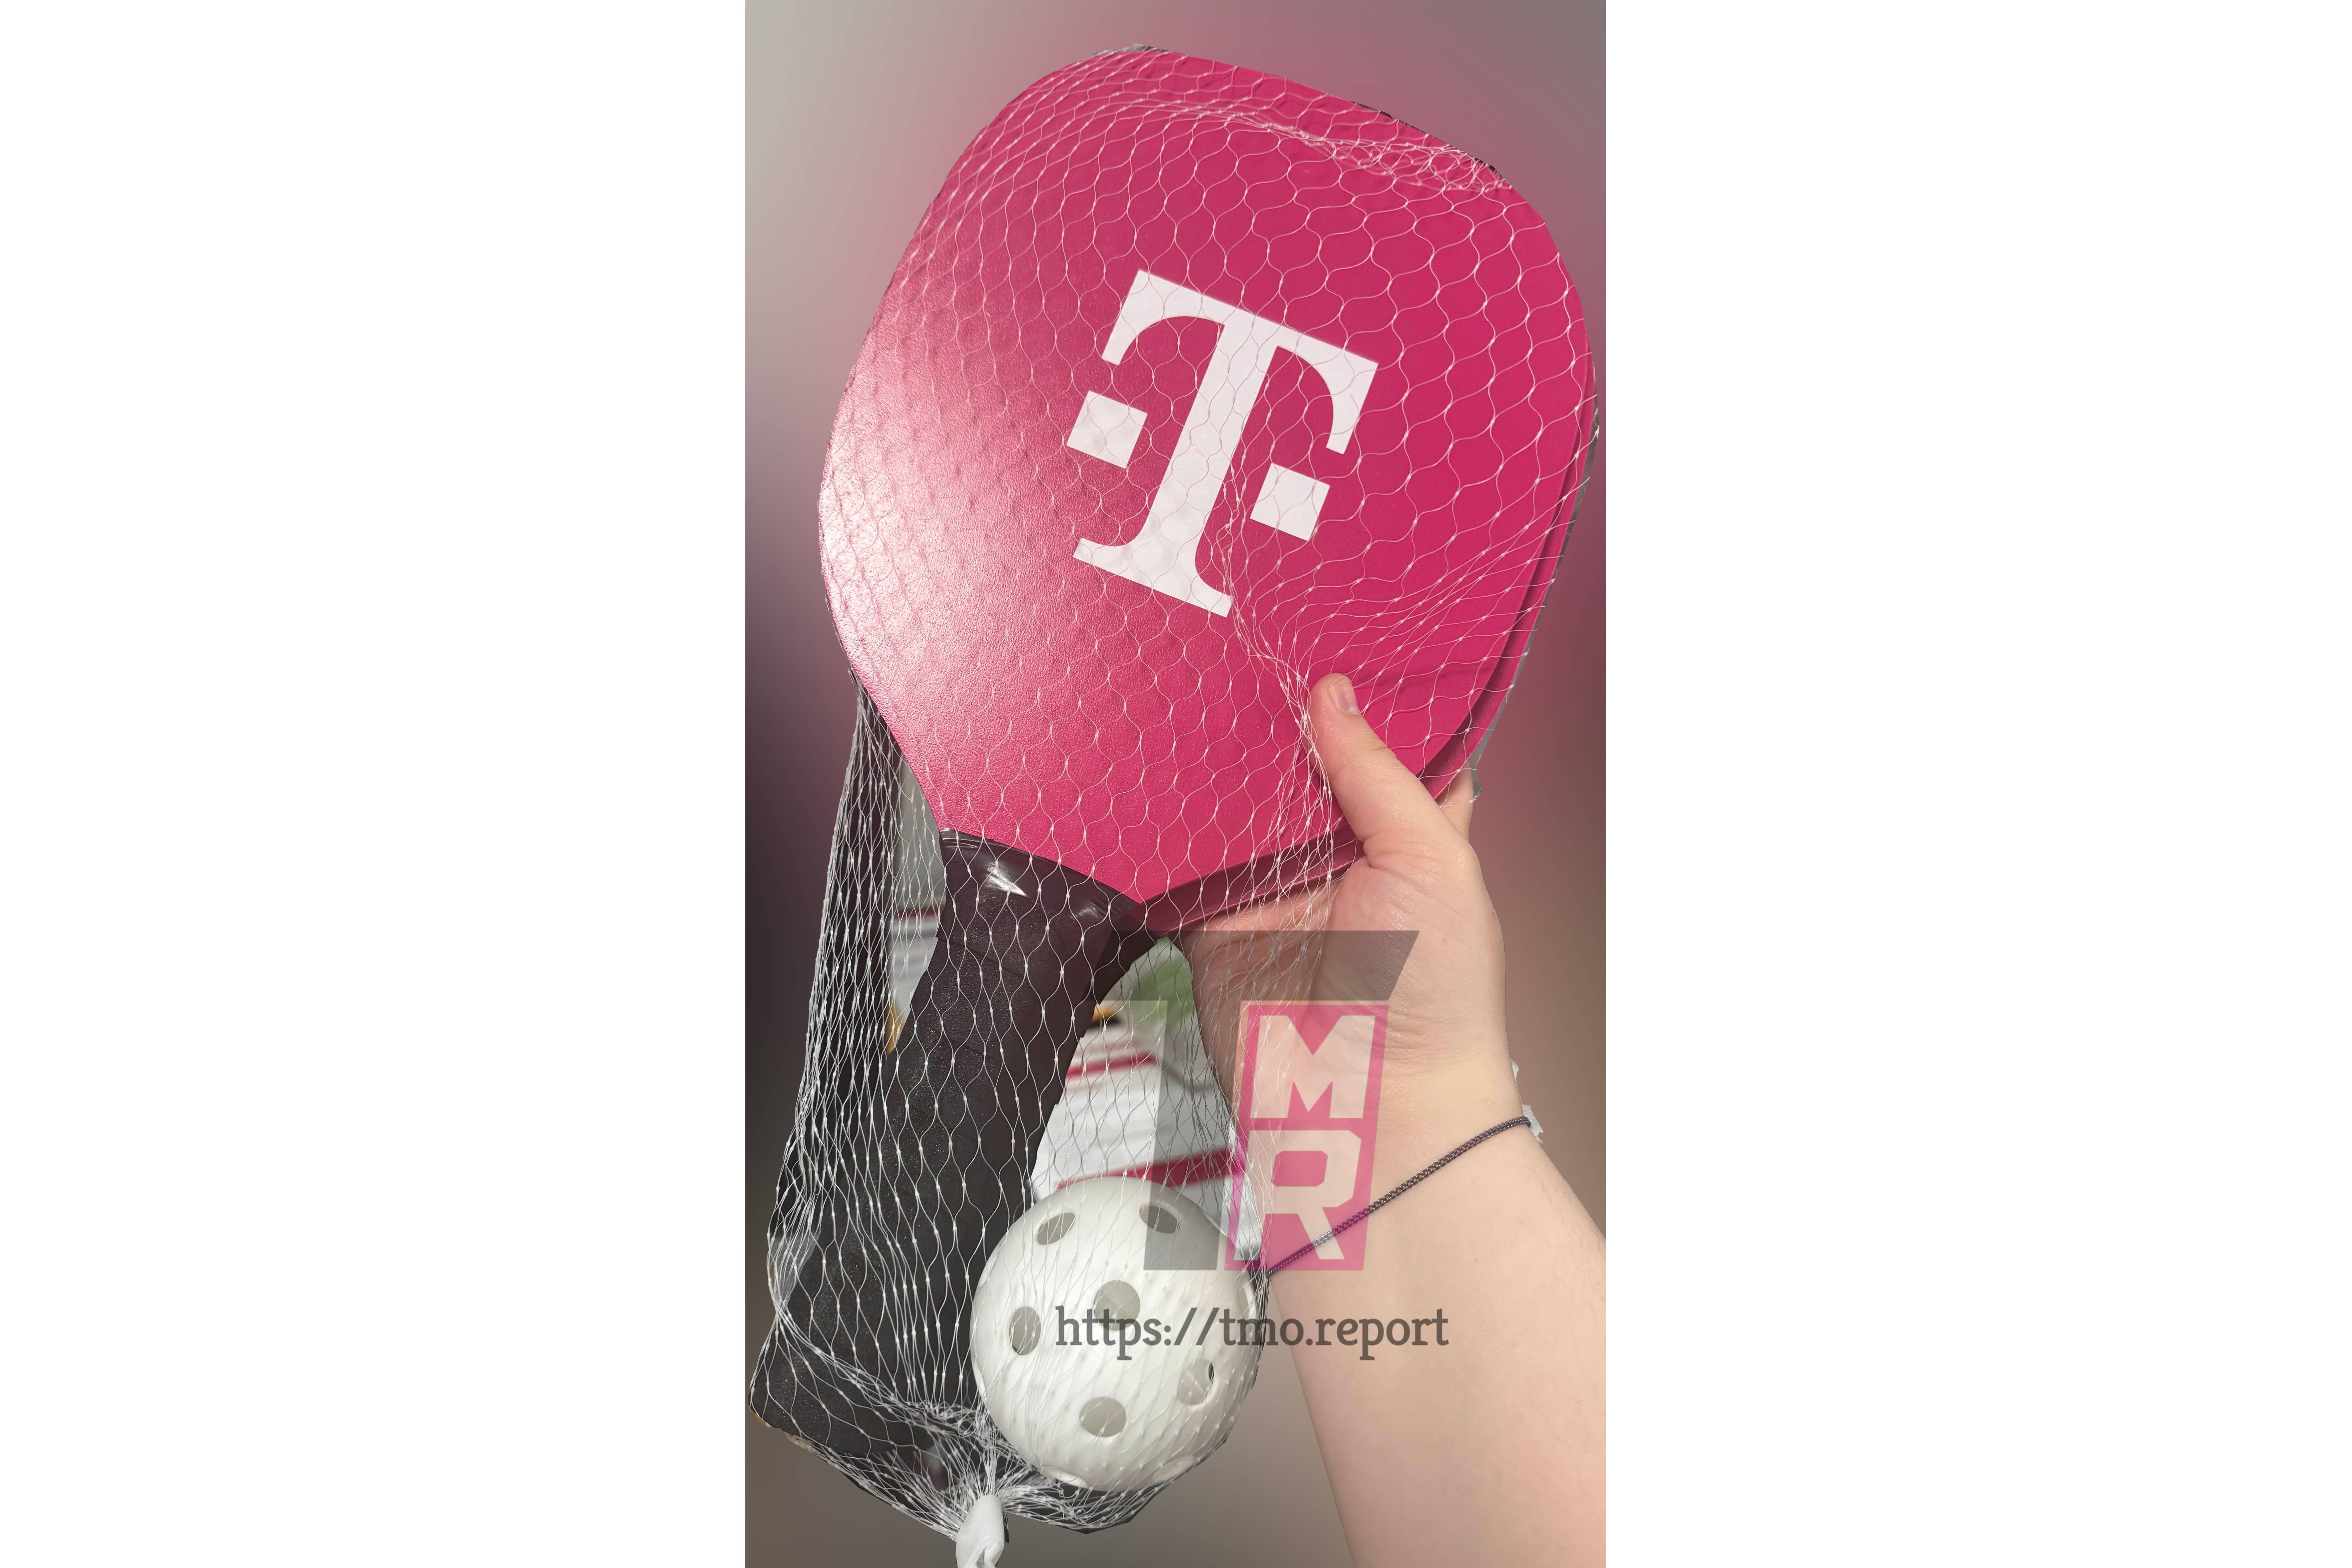 Make sure you have a pickleball buddy to enjoy the next T-Mobile freebie with - T-Mobile stores across the country have already received the next sporty freebie for customers